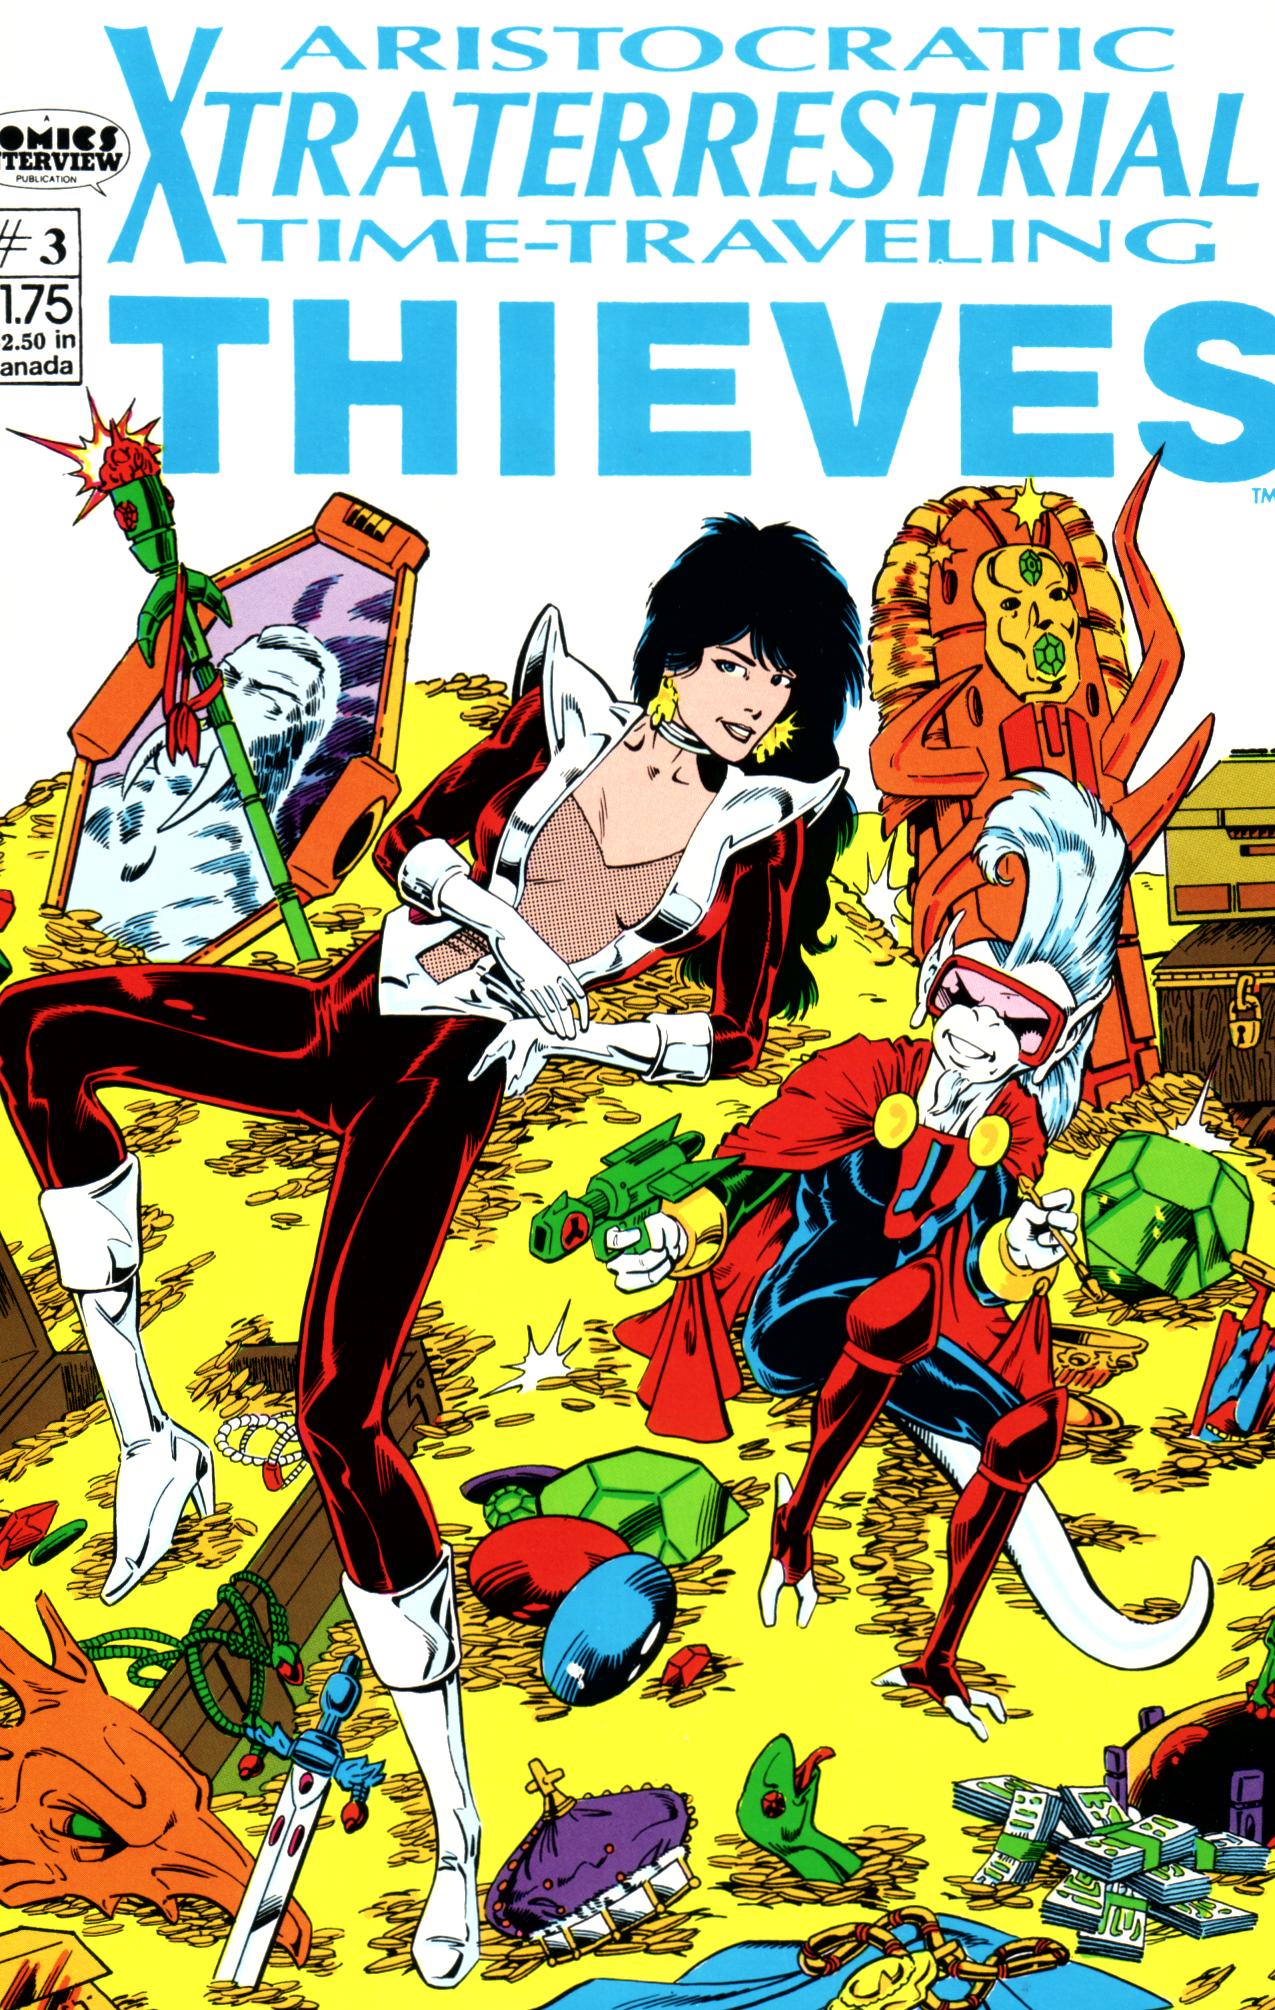 Read online Aristocratic Xtraterrestrial Time-Traveling Thieves comic -  Issue #3 - 1